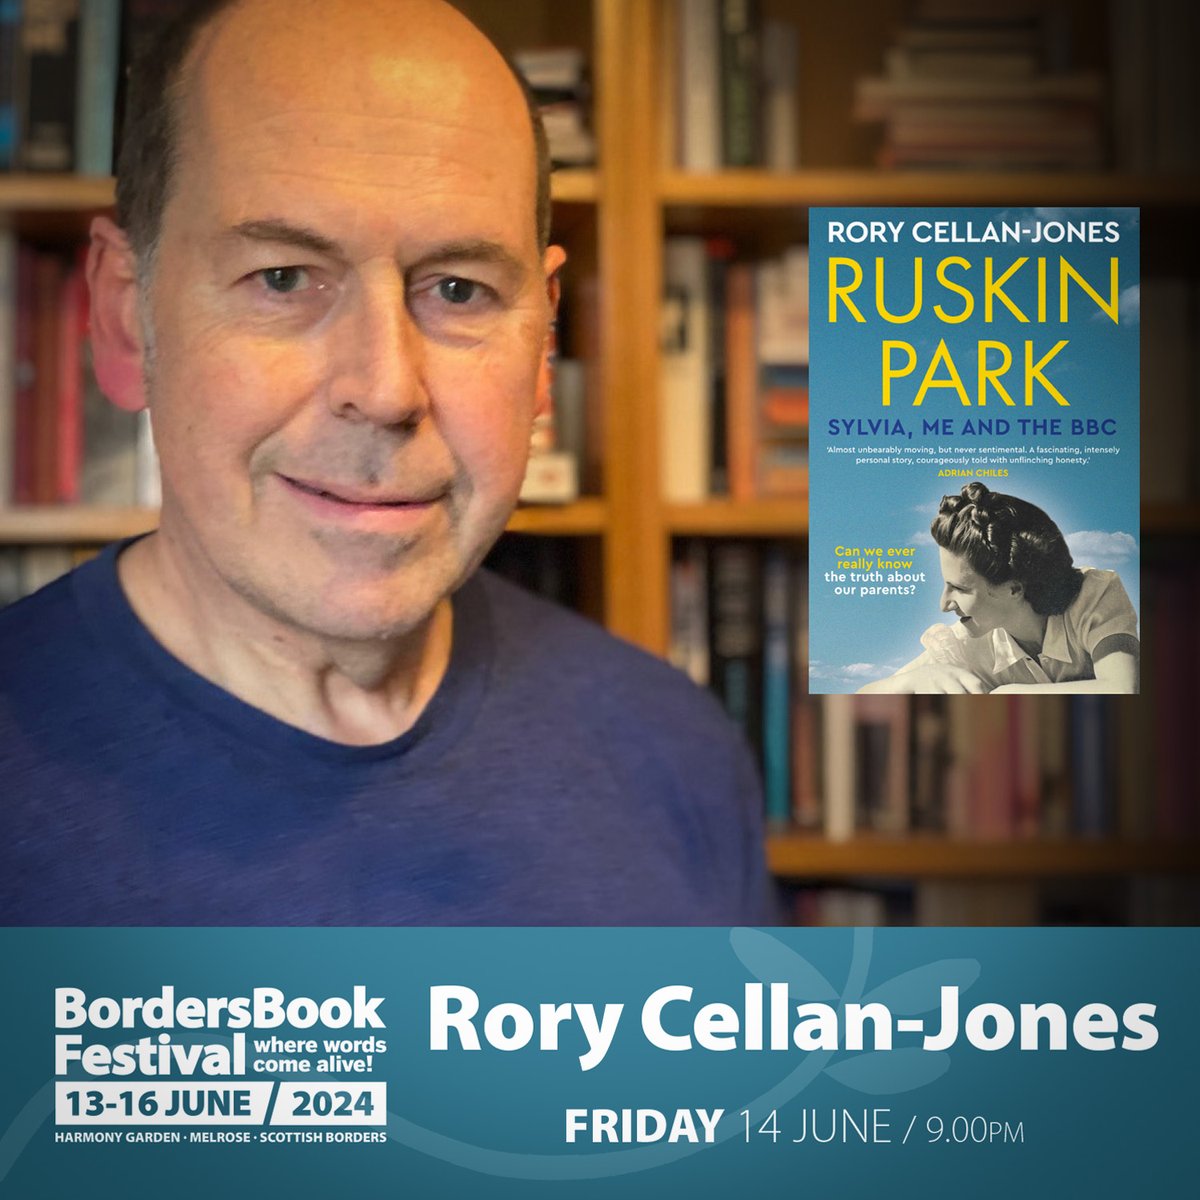 From BBC Technology correspondent to freelance journalist and podcaster, Rory has changed direction again with Ruskin Park: Sylvia, Me and the BBC, a moving memoir about his unconventional childhood. TICKETS: tikt.link/rorycell WEBSITE: bordersbookfestival.org